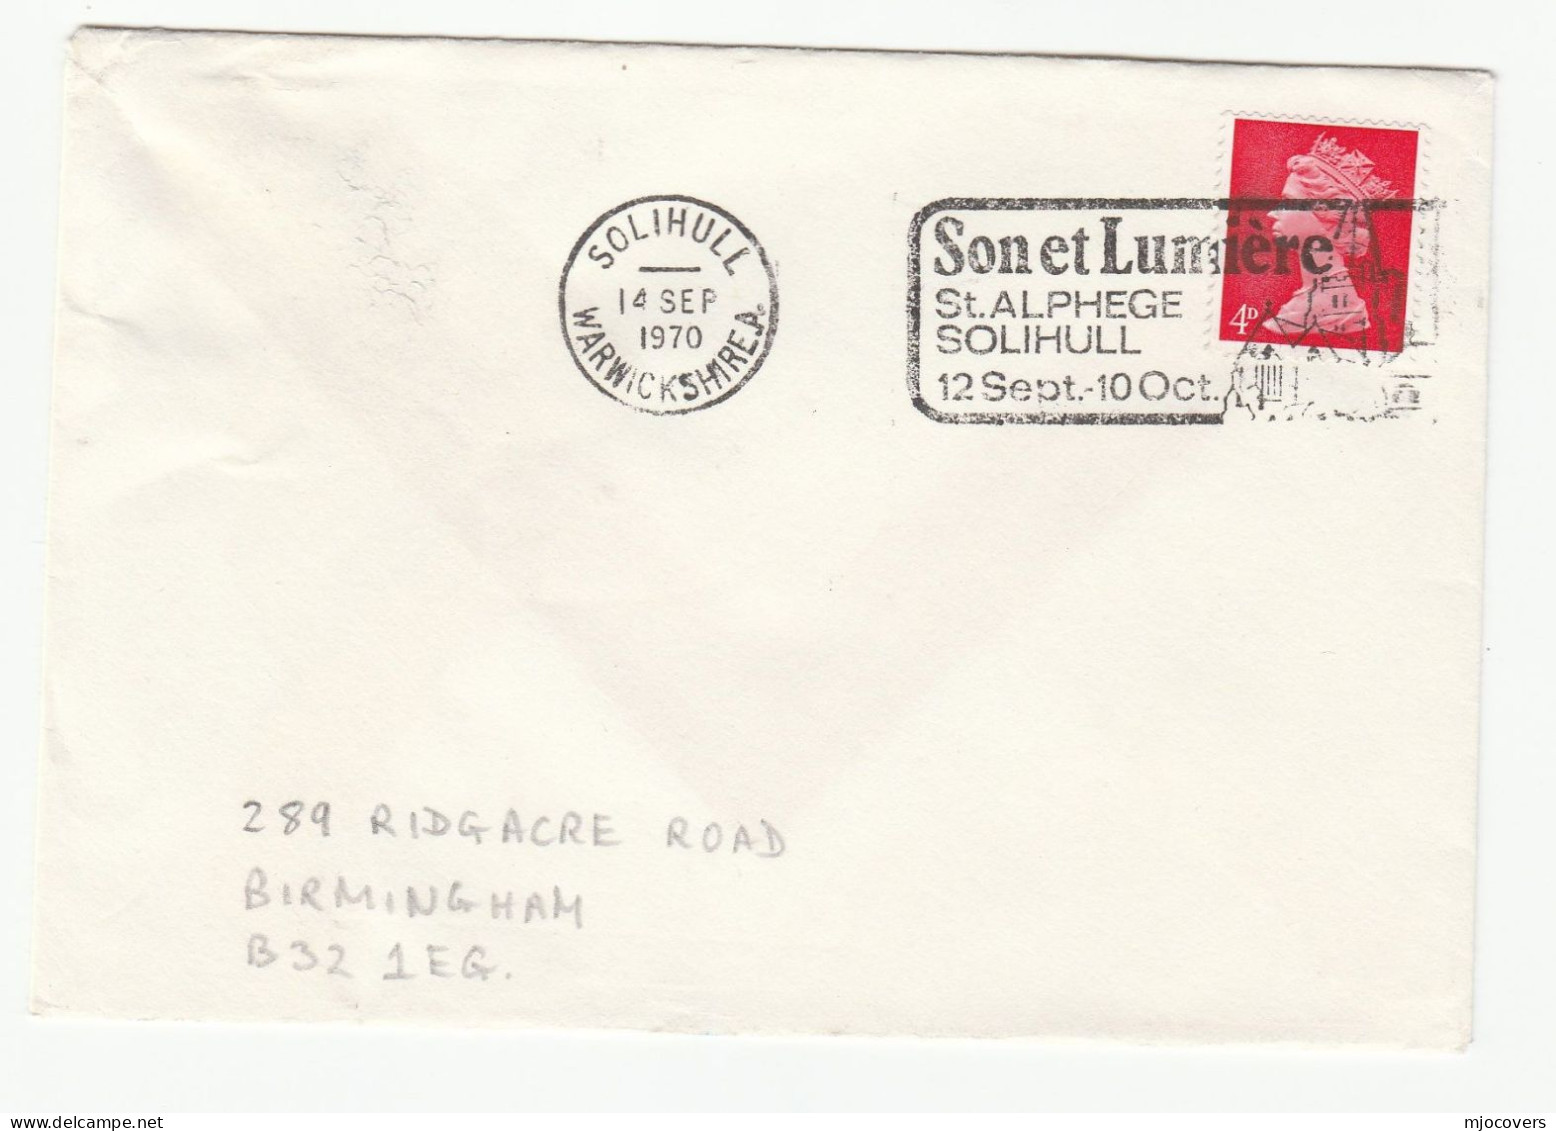 ST ALPHEGE CHURCH Solihull 1970 Cover SON ET LUMIERE Illus SLOGAN  Gb Stamps Religion Christianity - Covers & Documents